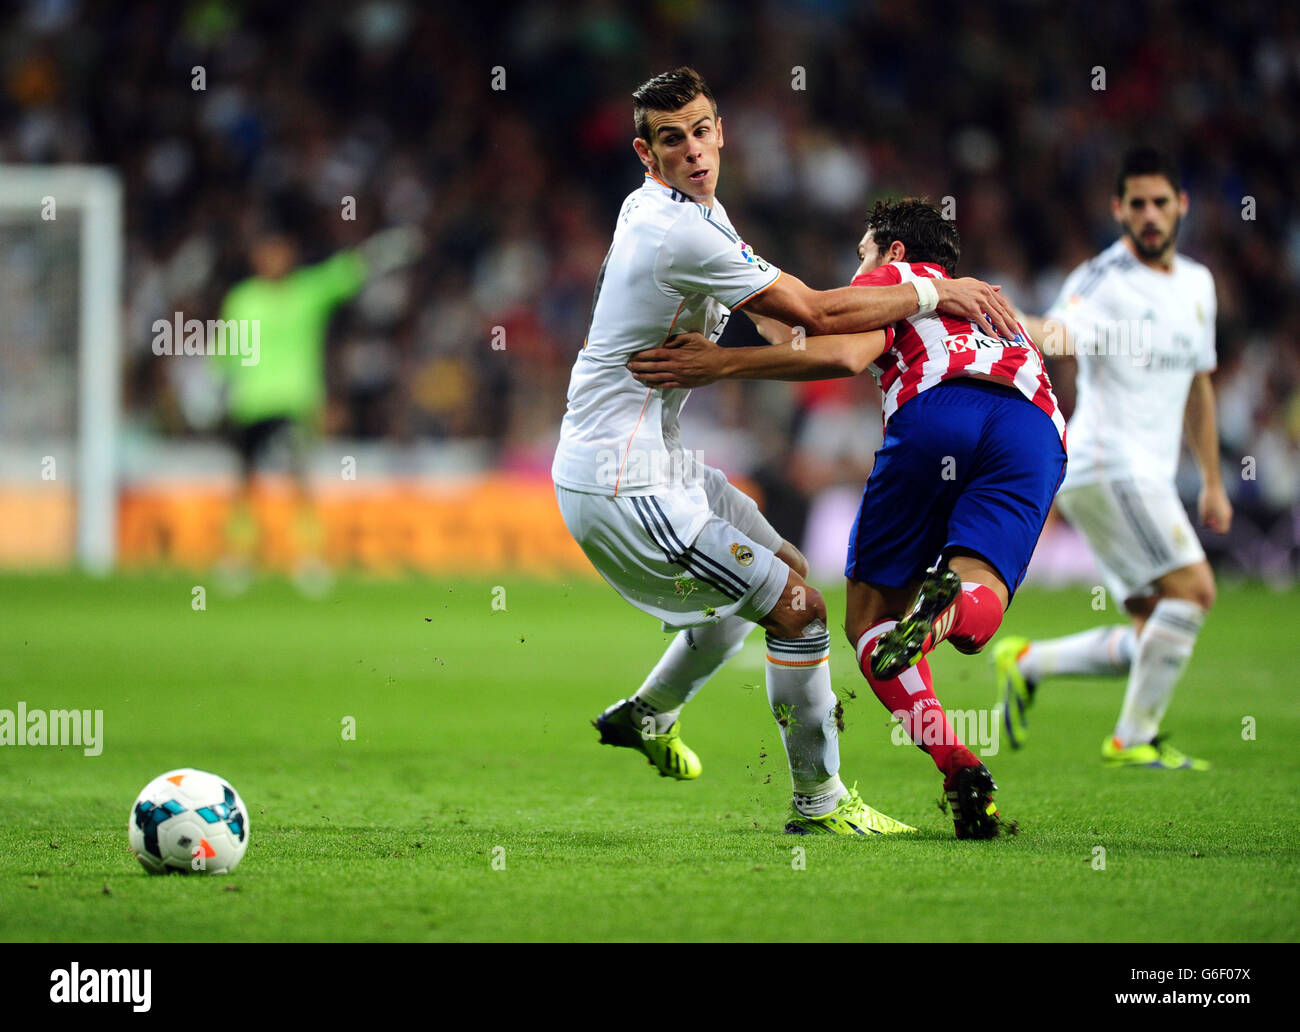 Real Madrid's Gareth Bale and Atletico Madrid's Godin battle for the ball during the La Liga match at Santiago Bernabeu, Madrid, Spain. Stock Photo